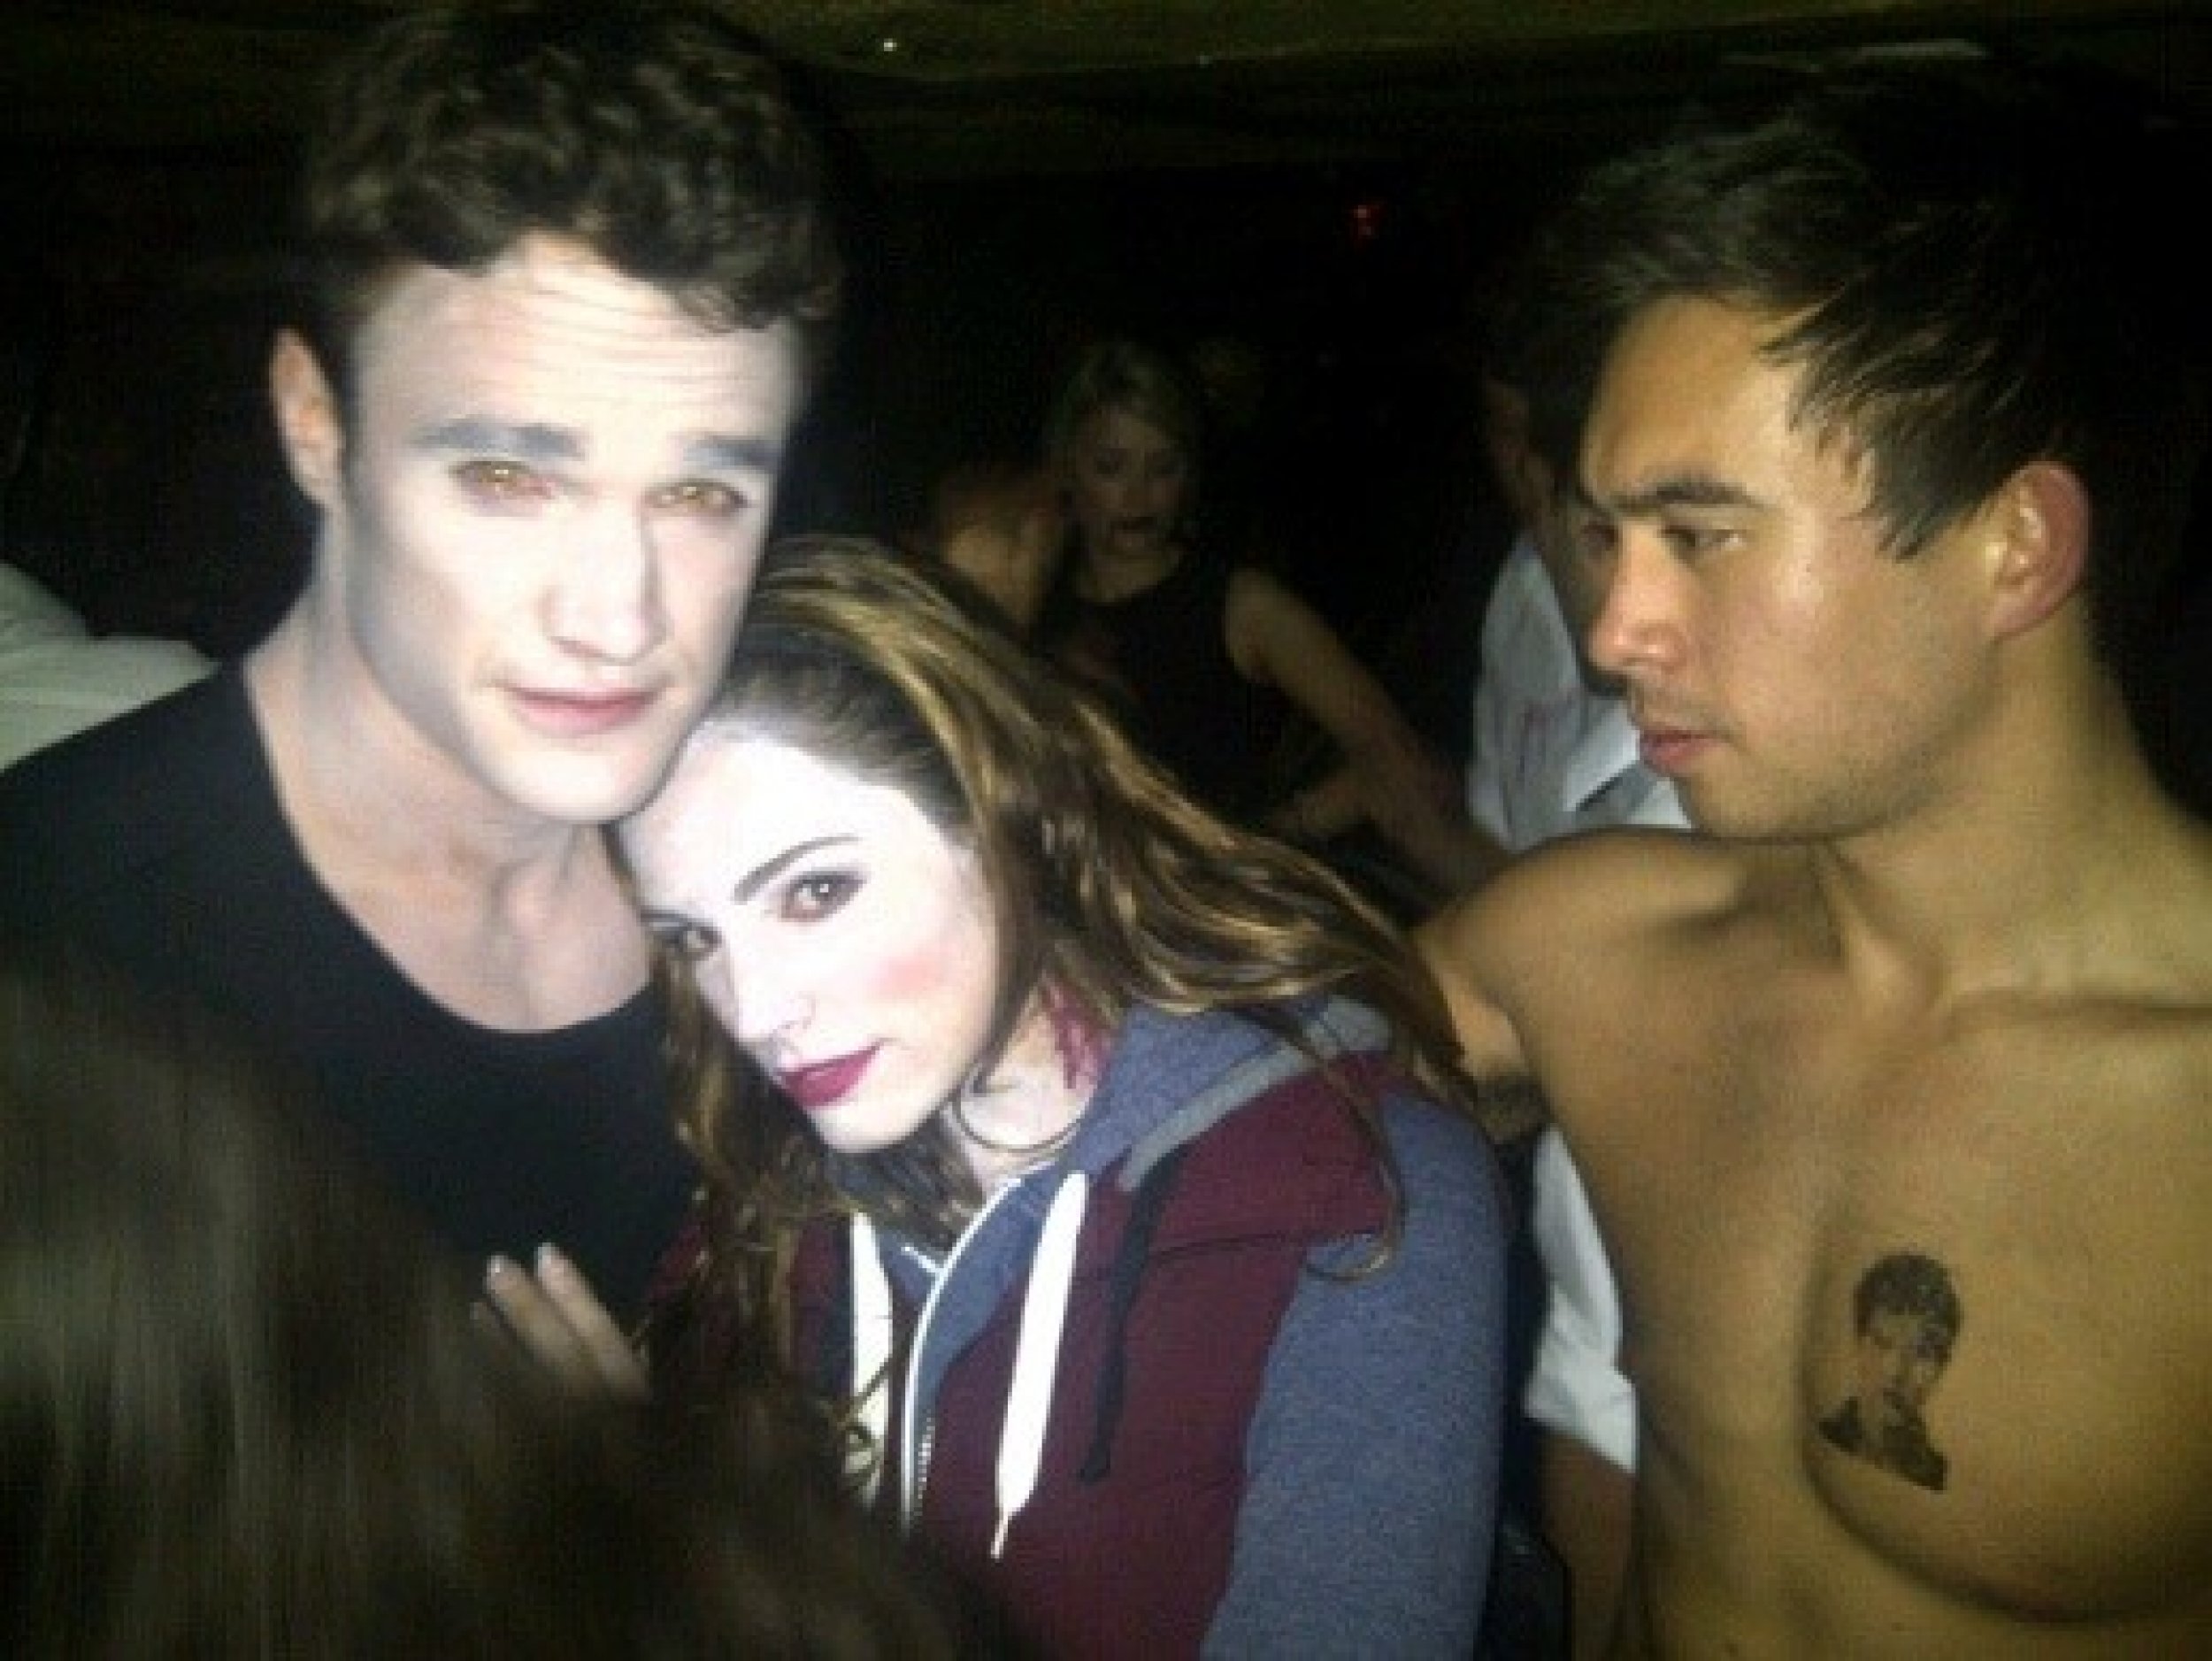 Kelly Brook dressed up as Bella Swan while her boyfriend Thom Evans R dressed up as Edward Cullen and his friend as Jacob Black.